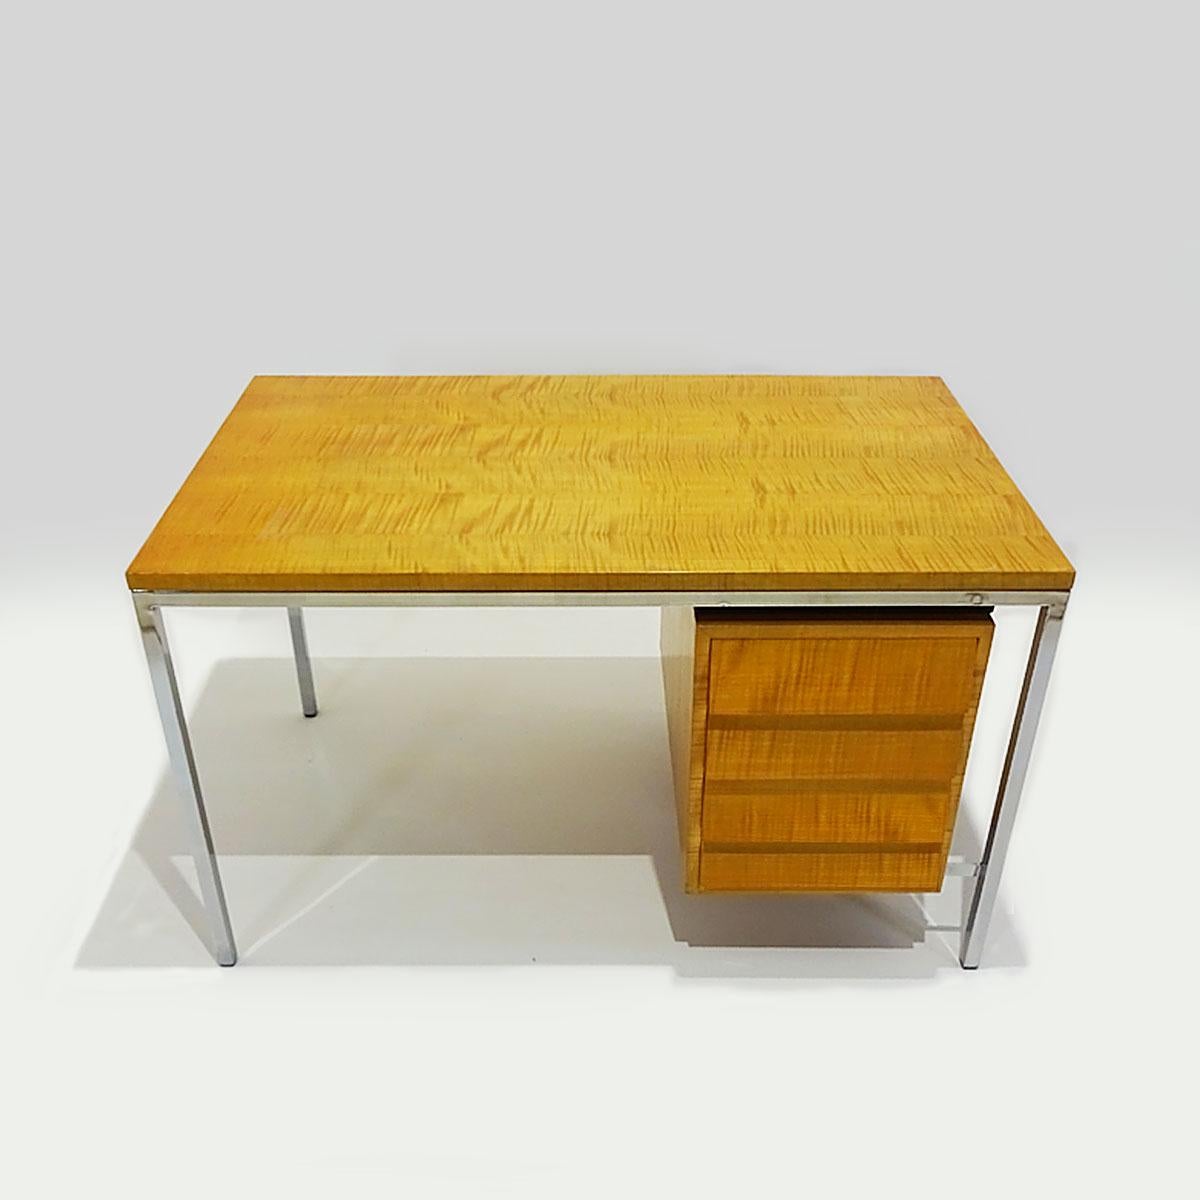 A truly rare and beautiful late 1940s desk constructed in polished steel and Tiger Stripe maple attributed to Florence Knoll and marked ’01 FK’.

The earliest of all FK’s desks that entered the main stream was the model 17 wooden desk constructed